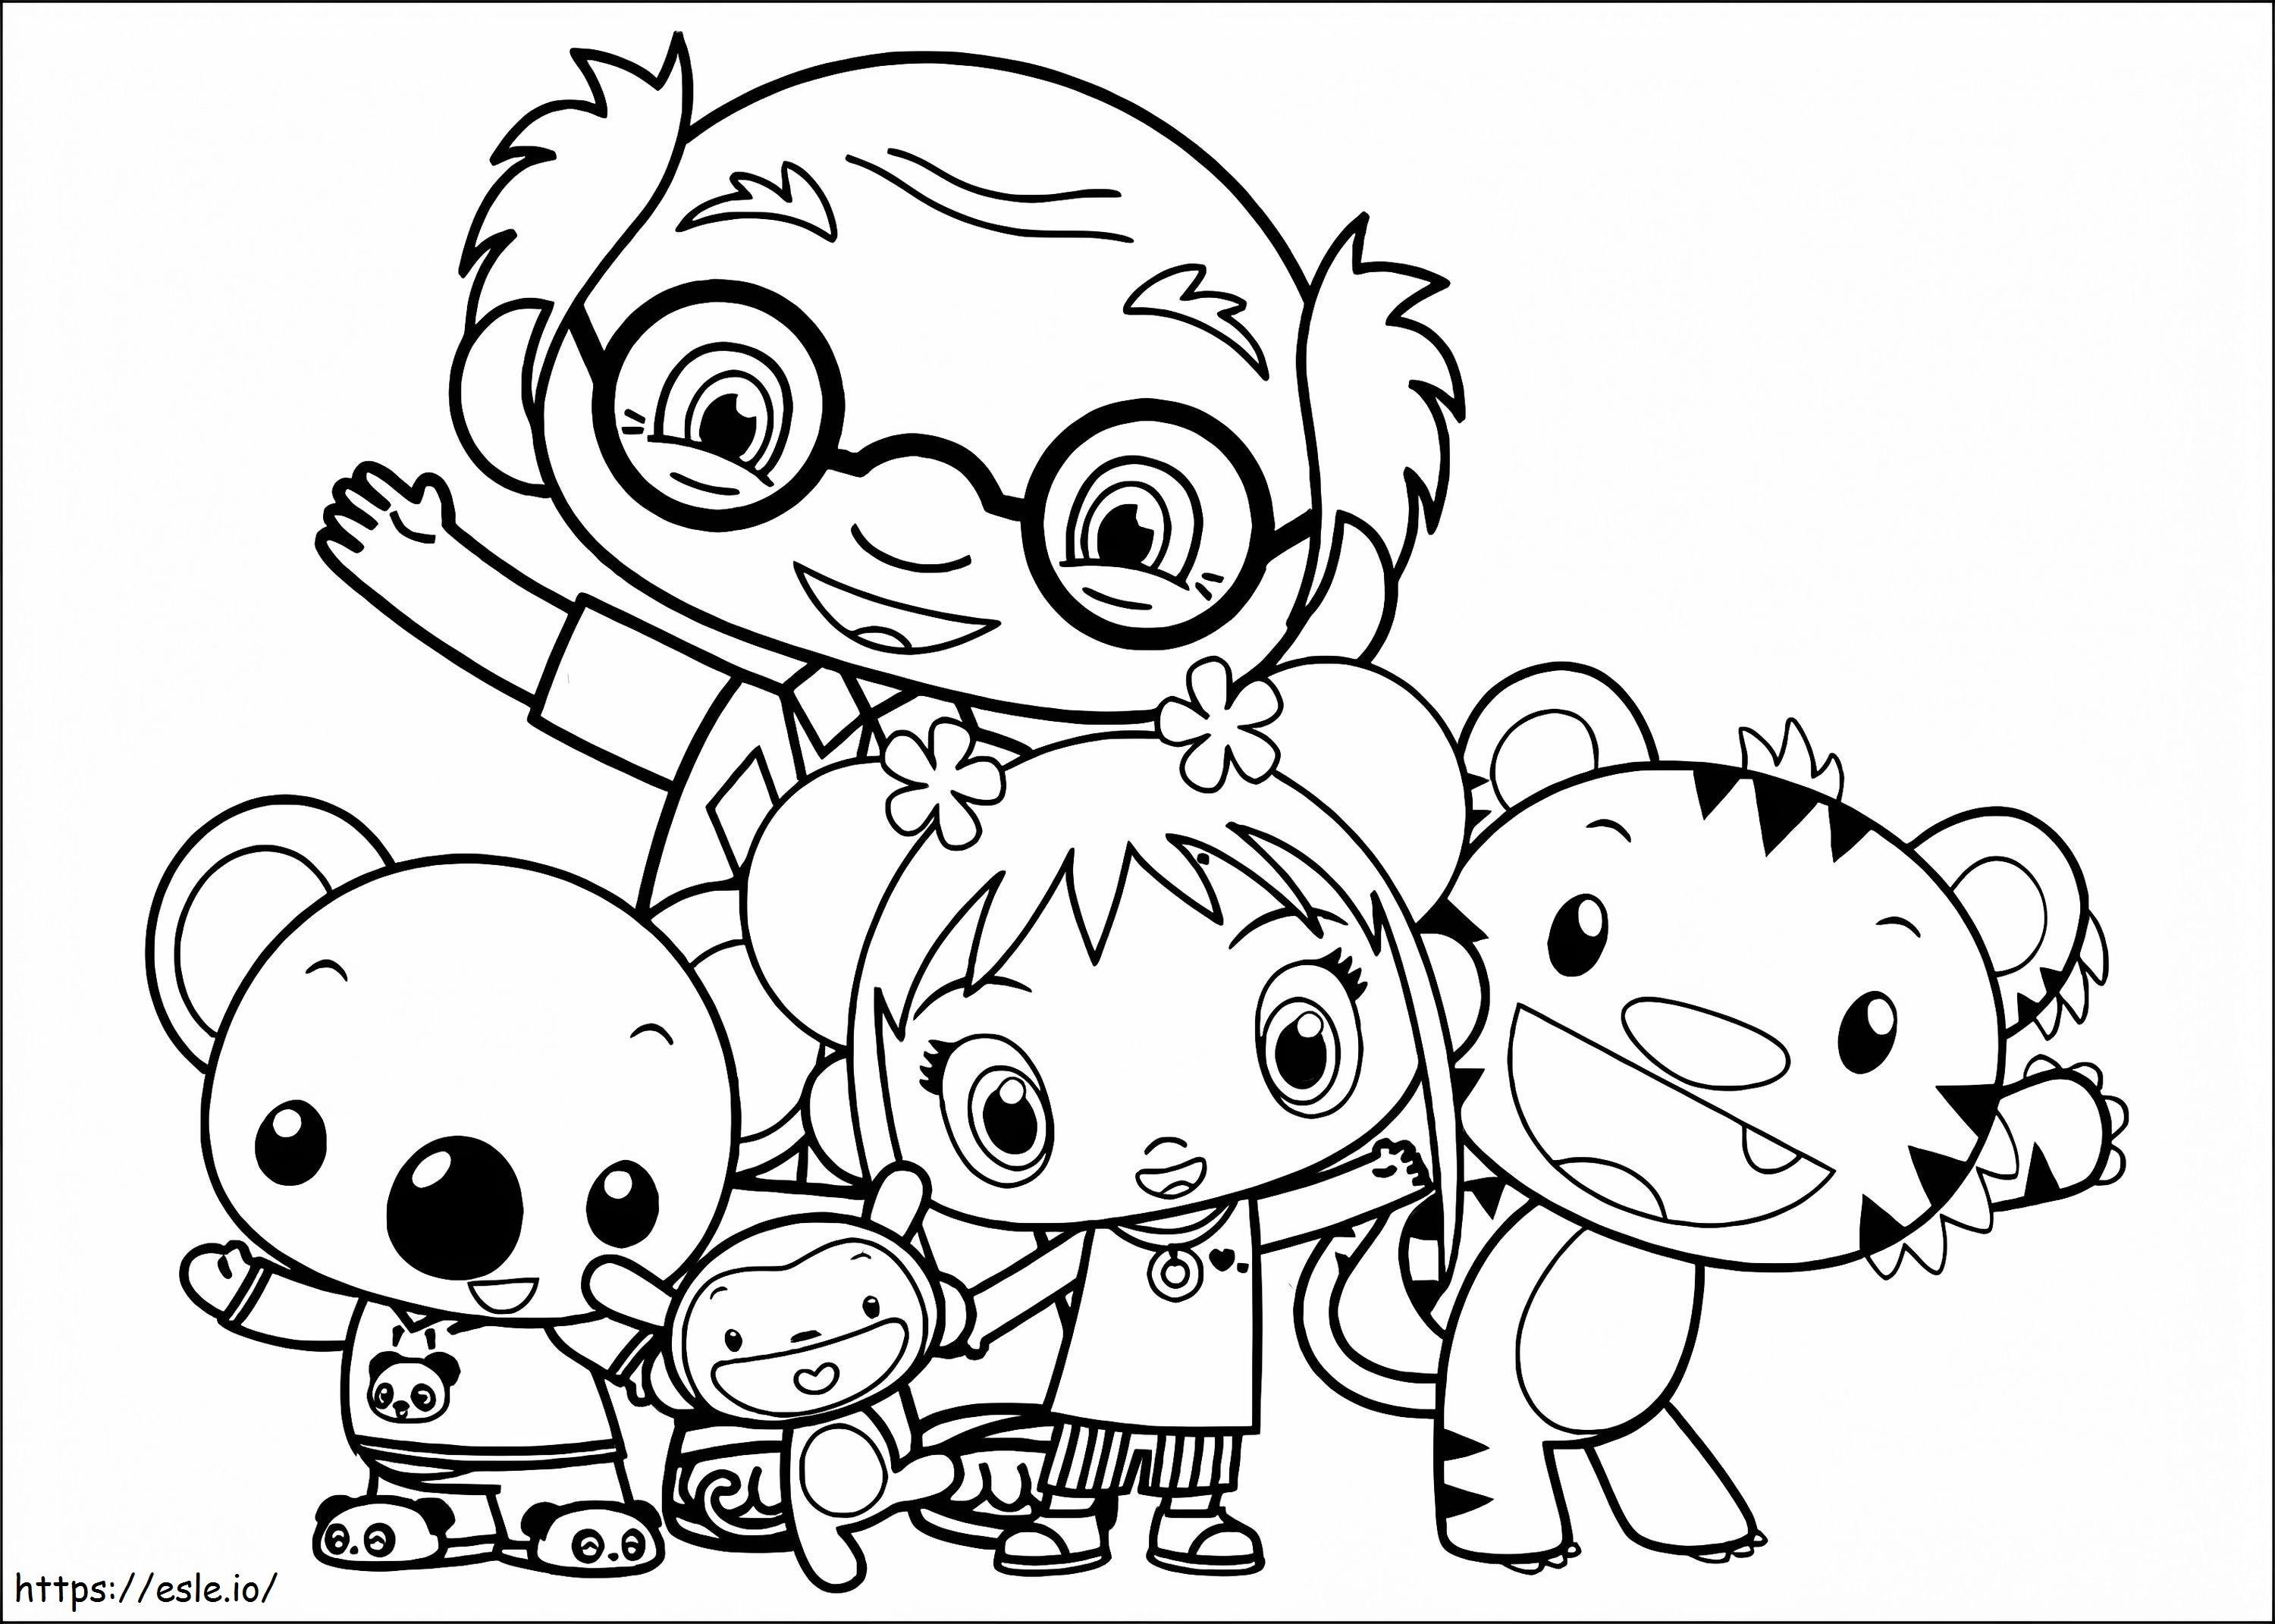 Characters From Ni Hao Kai Lan coloring page